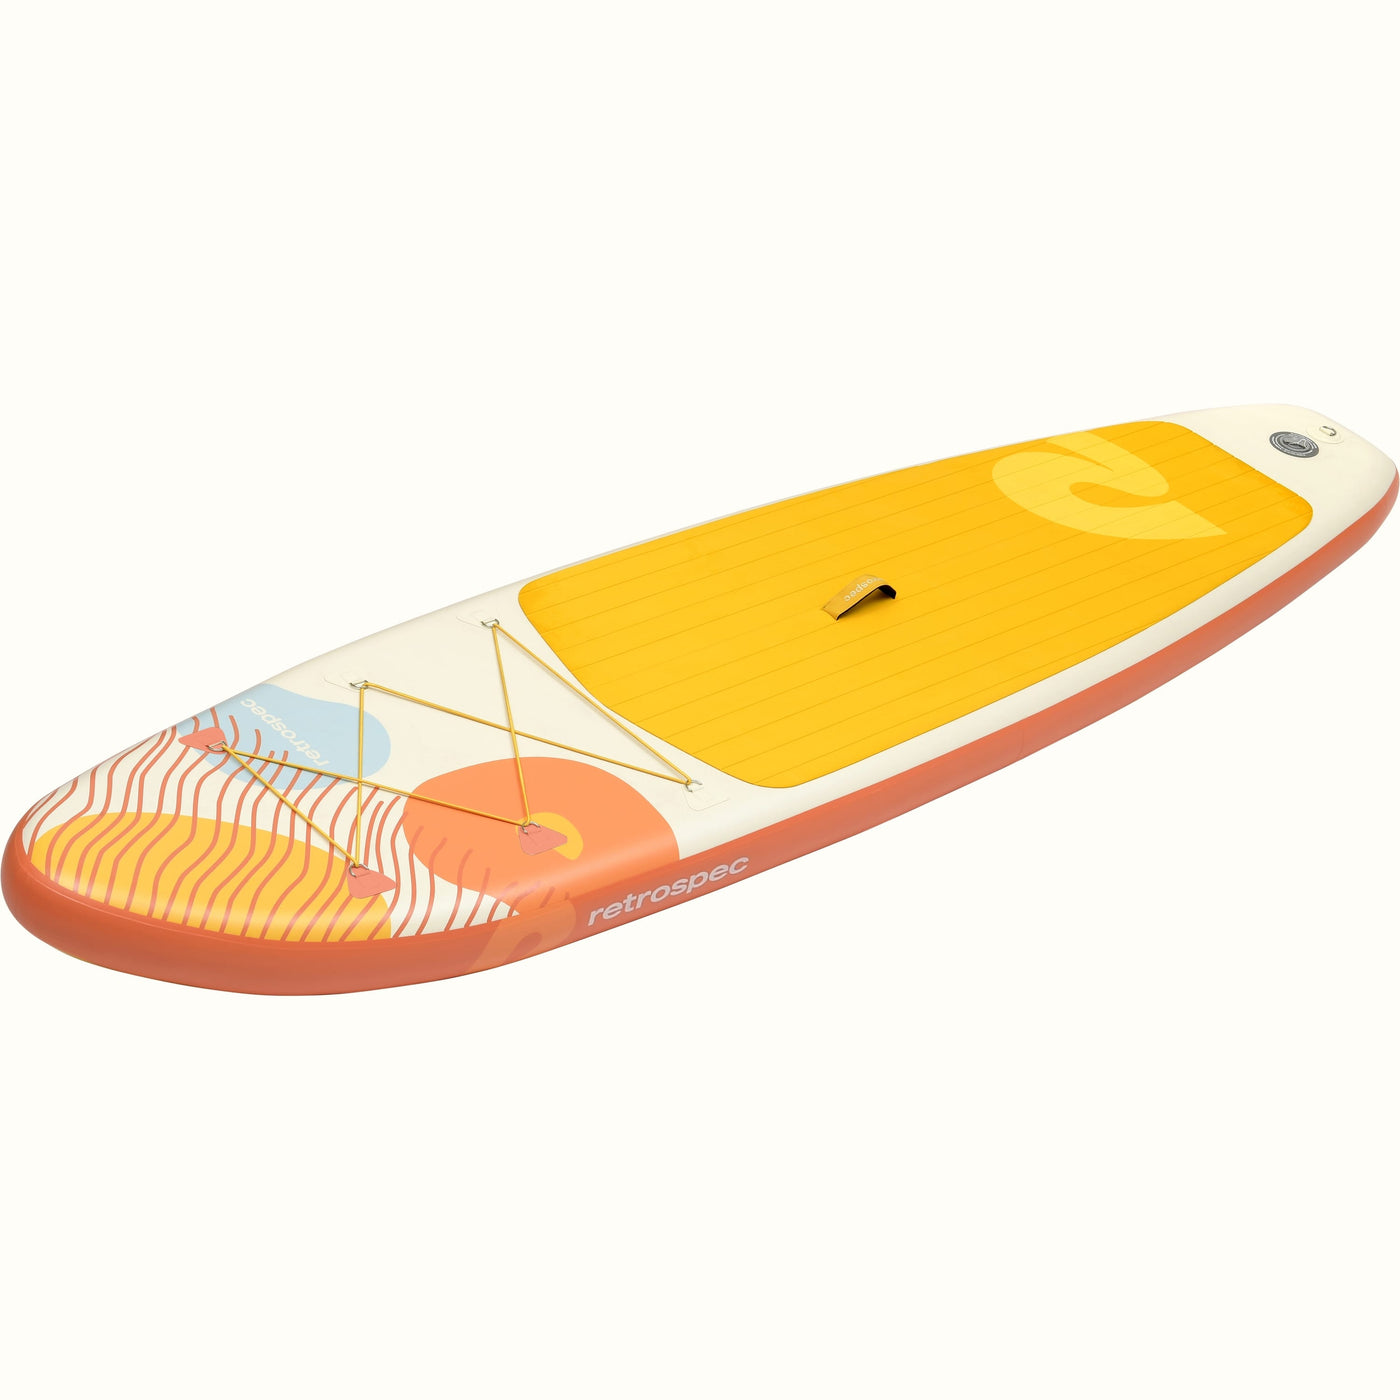 Weekender Nano Kids’ Inflatable Stand Up Paddle Board 8’